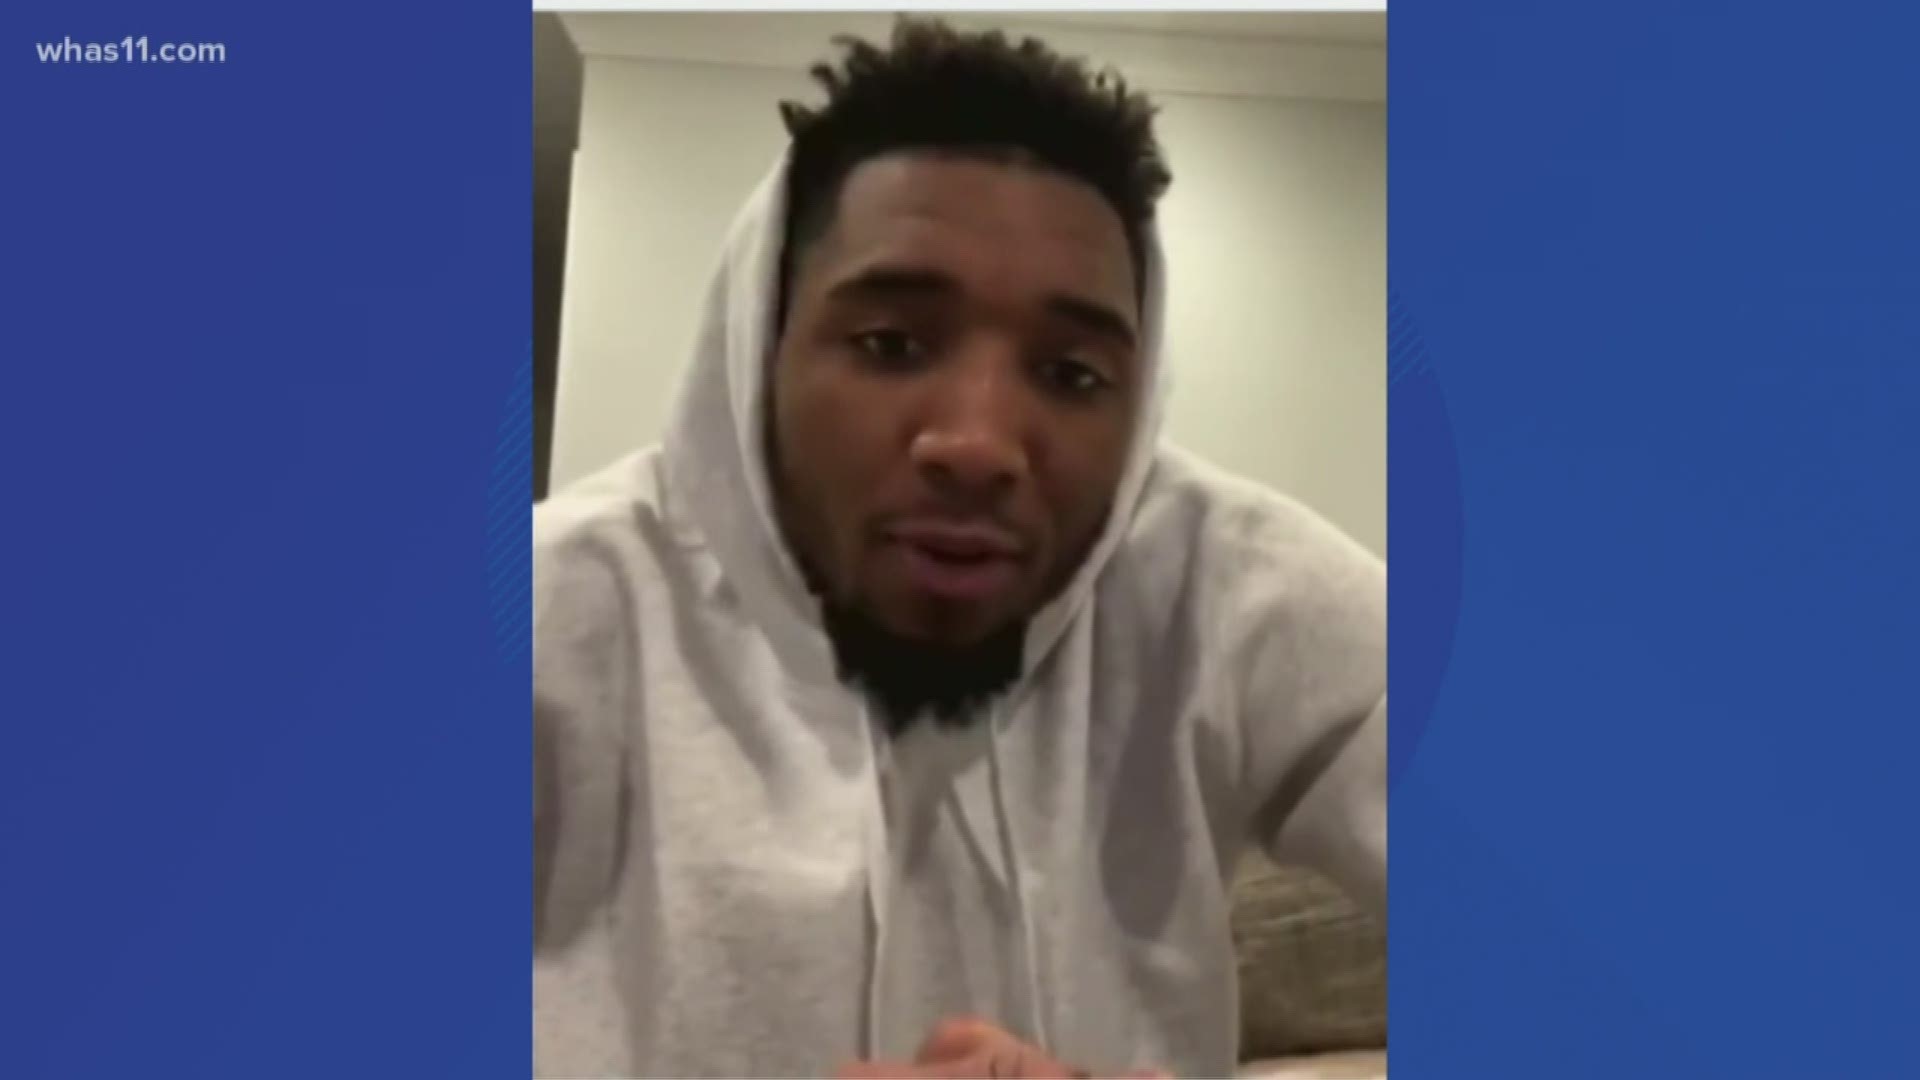 Donovan Mitchell reached out to fans via social media to let everyone know he's recovering and still in isolation after testing positive for coronavirus.